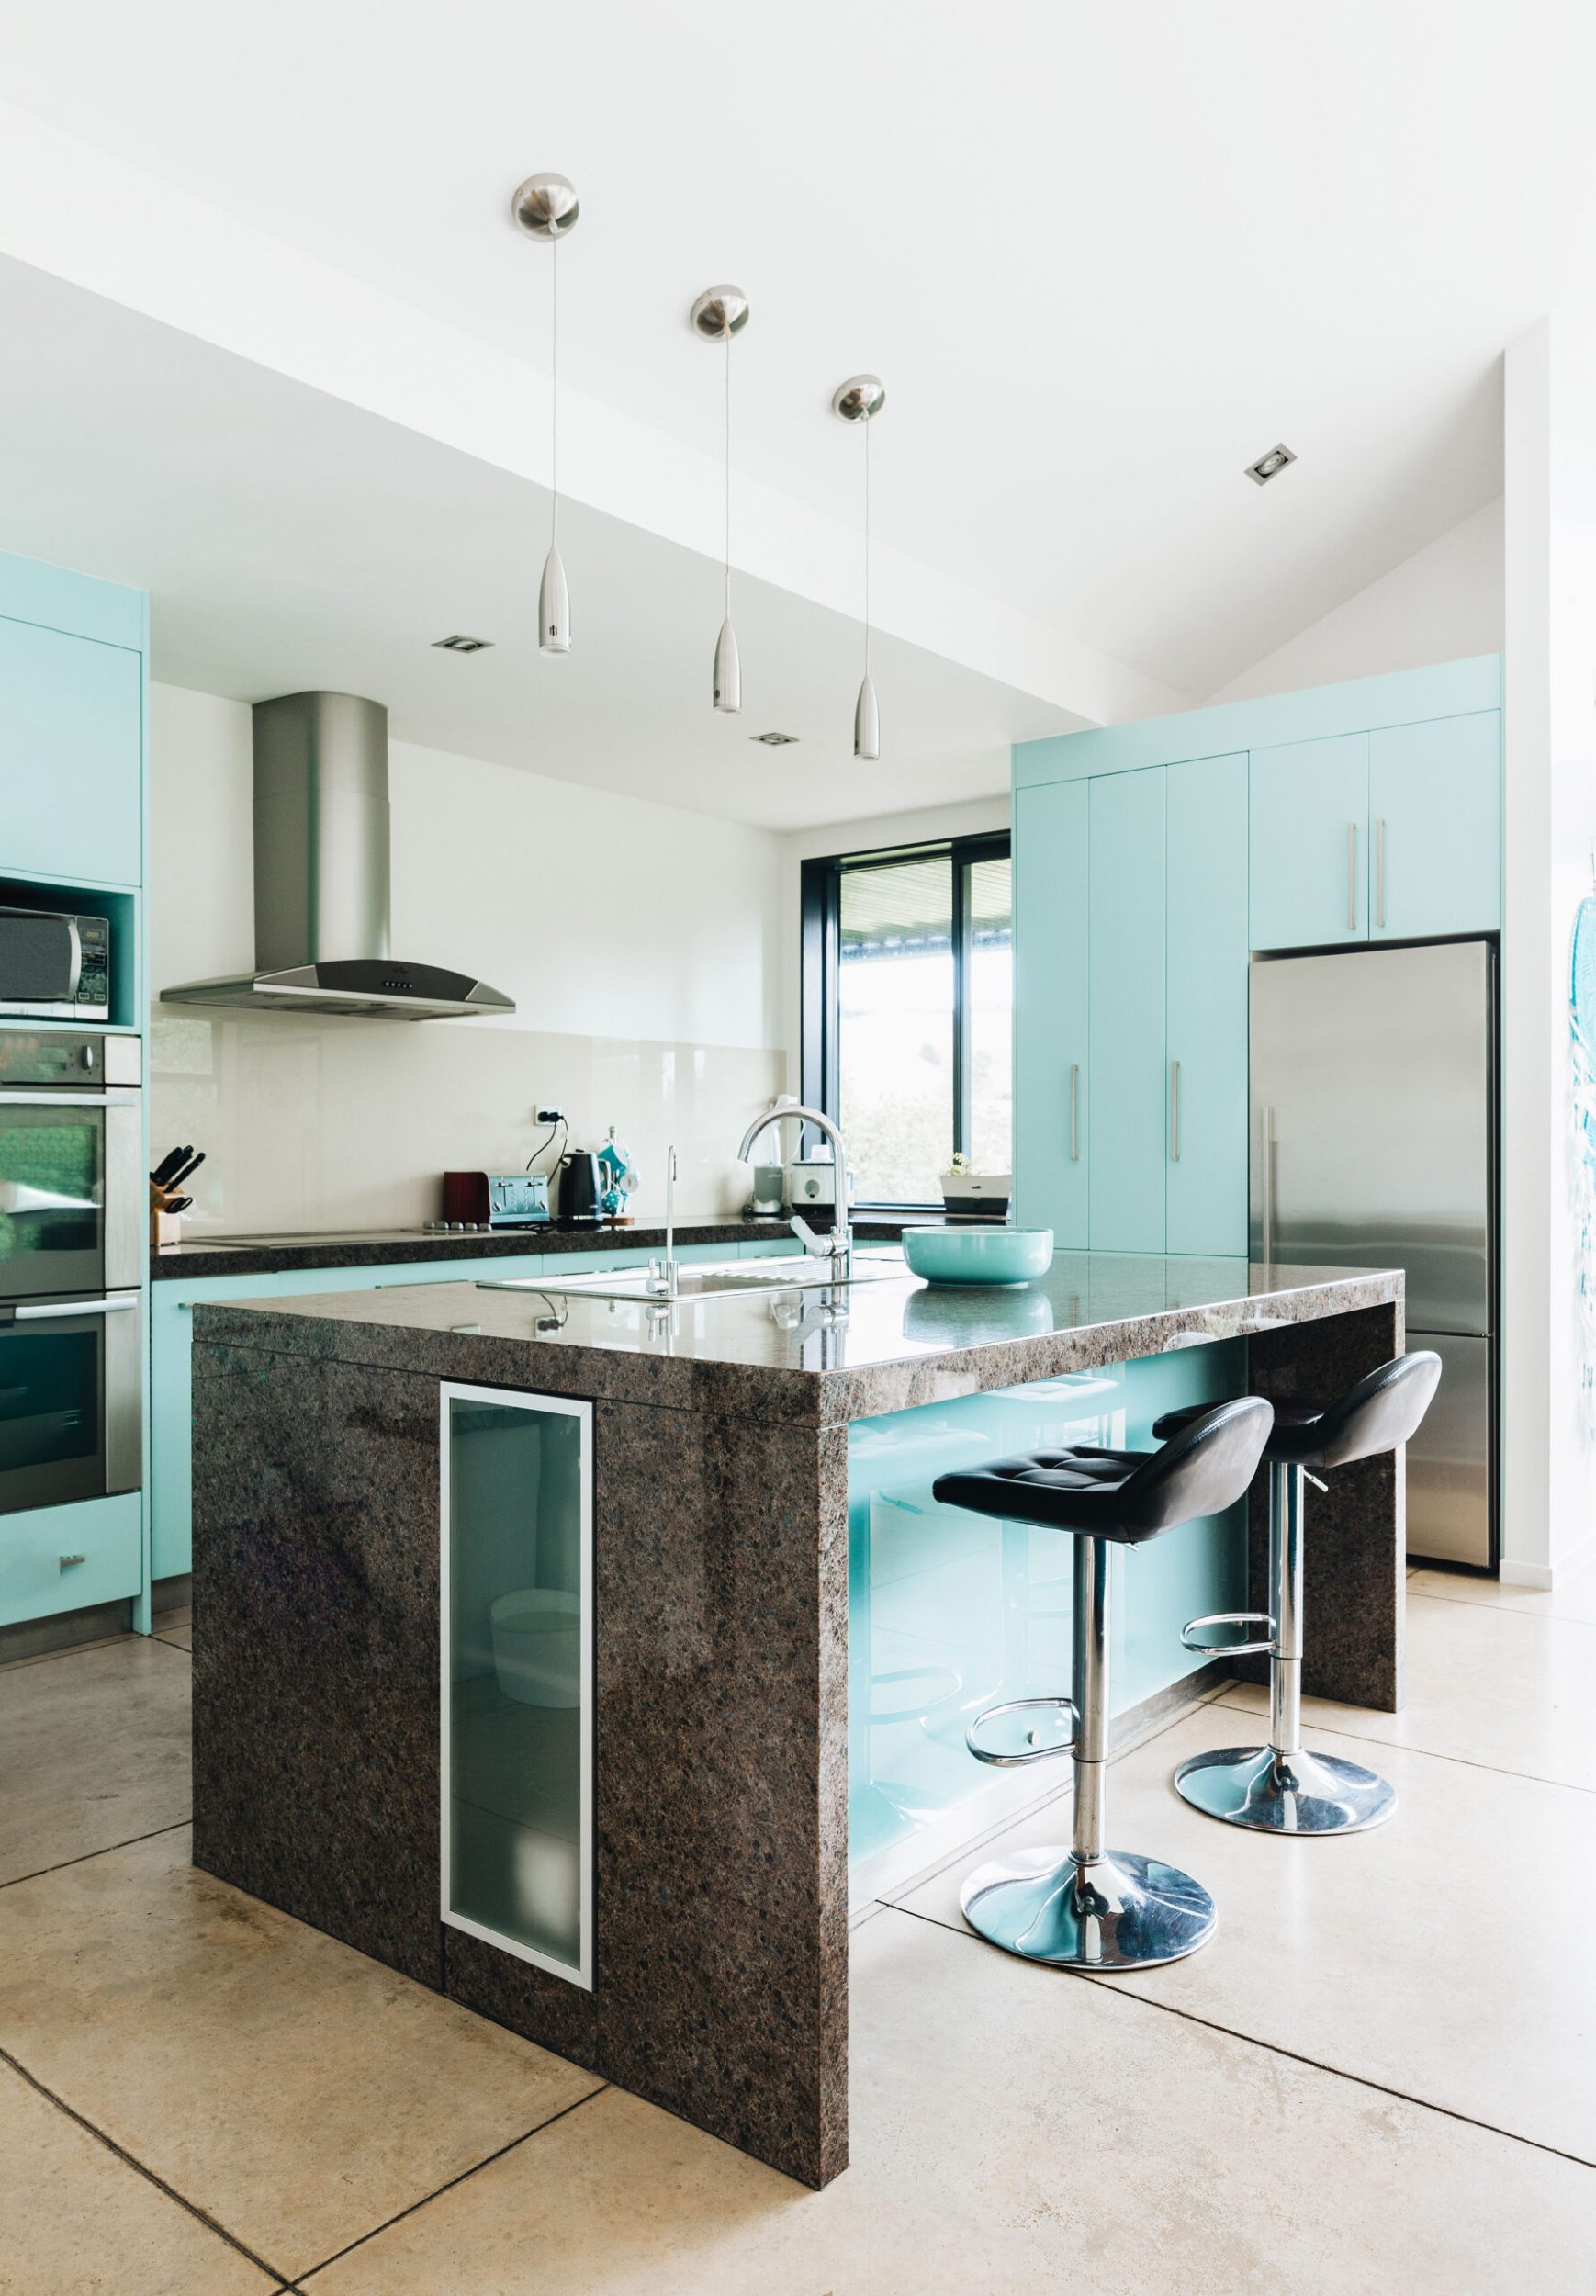 A white kitchen with mint green cabinets and a brown marble island